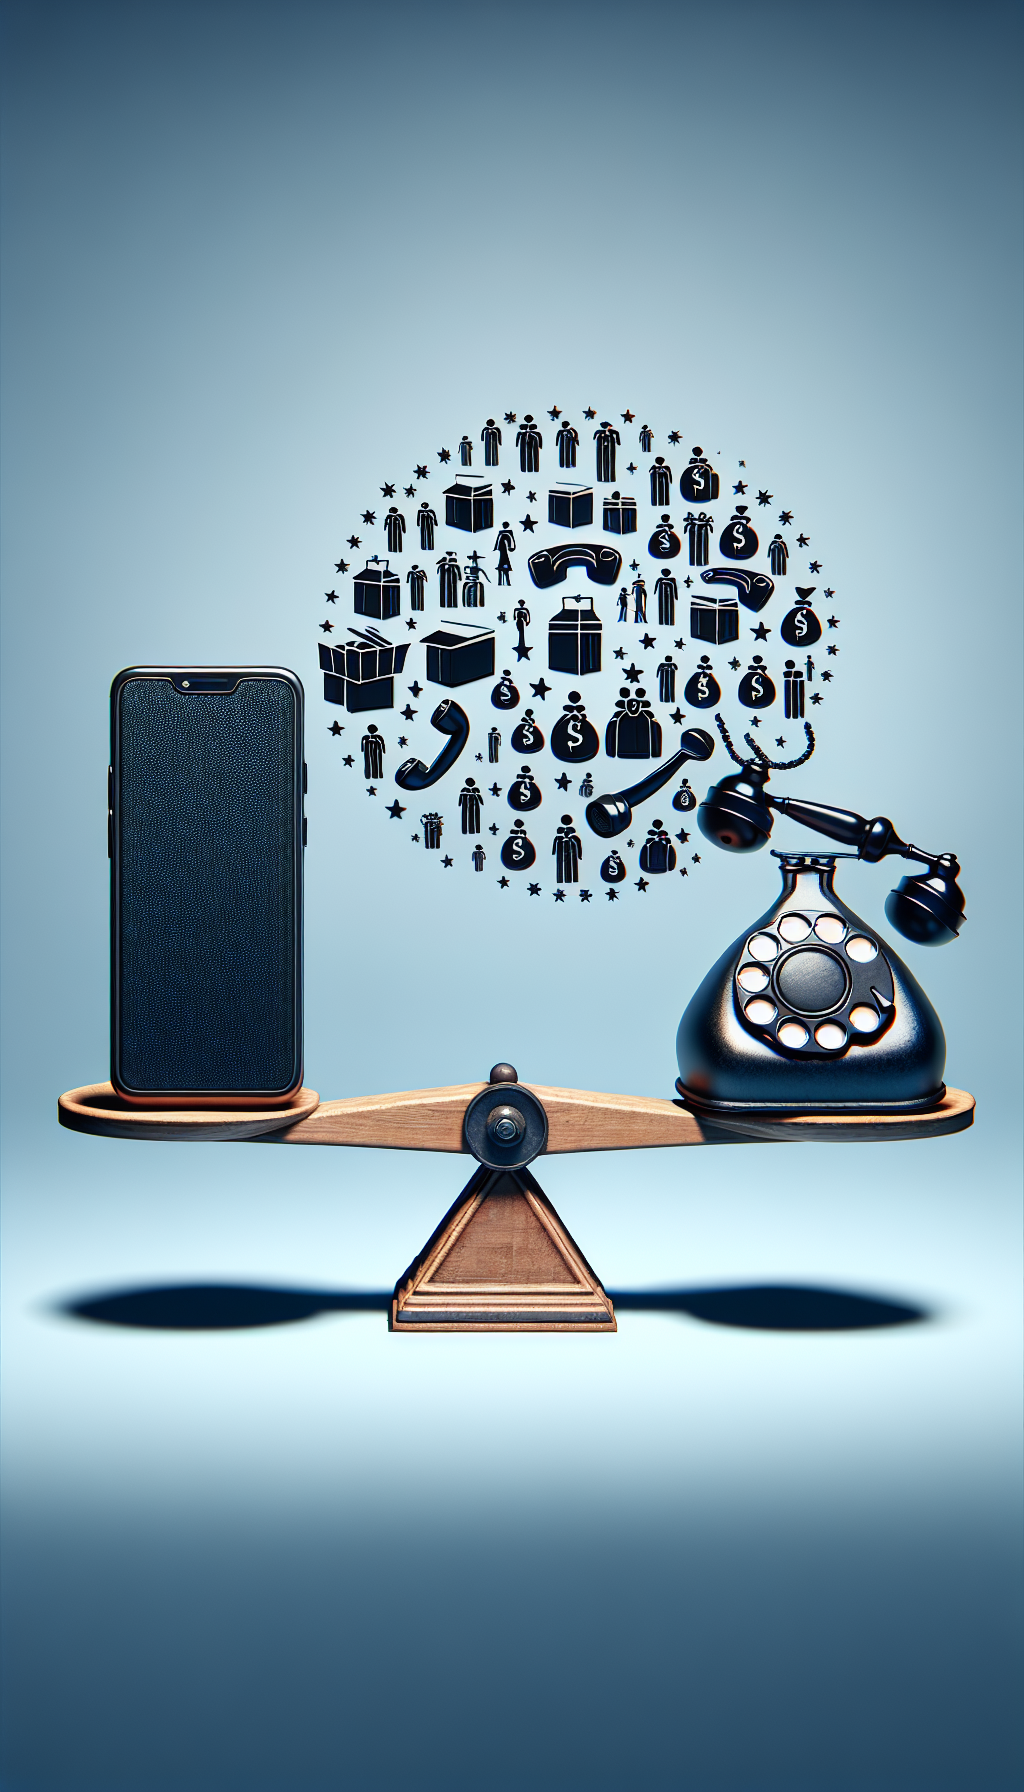 A whimsical illustration juxtaposes a sleek modern smartphone with a classic rotary dial telephone, both perched on a seesaw scale. Supply and demand icons—boxes and dollar signs for supply, and silhouetted crowds for demand—hover above each phone. Antique elements like rarity stars and vintage price tags adorn the rotary phone, highlighting its value amidst modern tech trends.